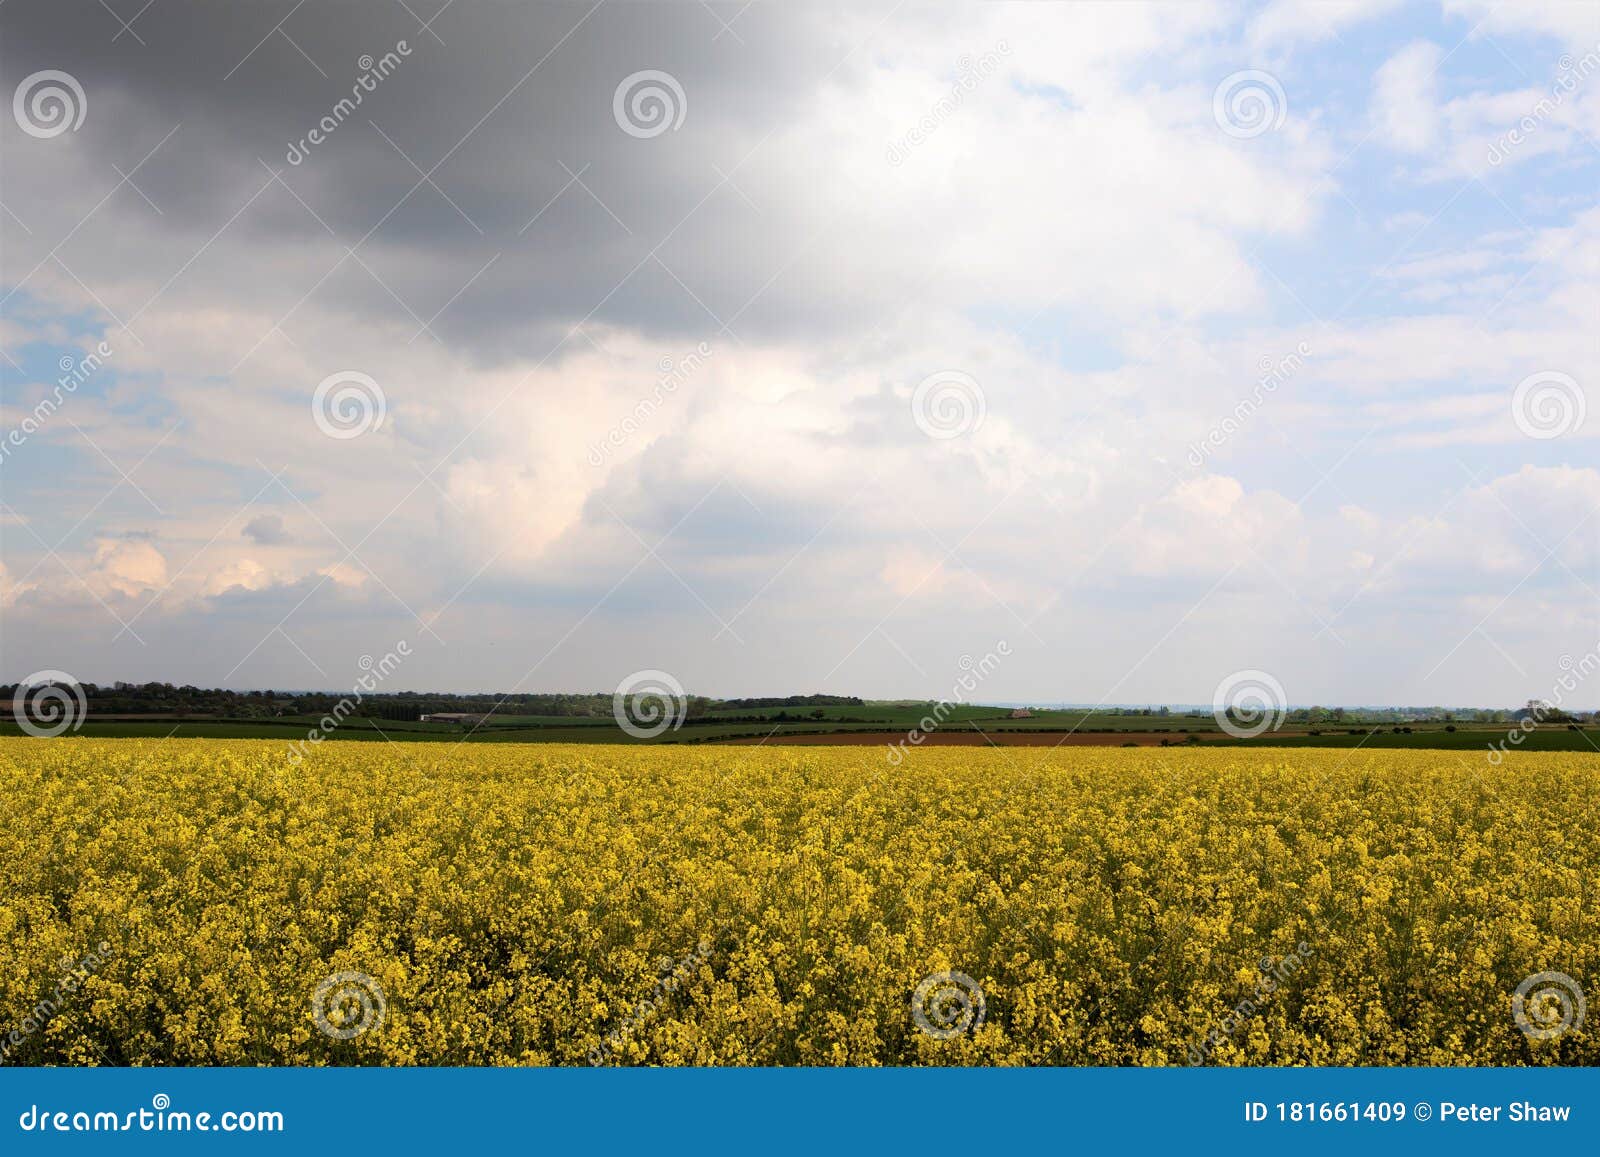 rape seed oil fields, in marr 2, doncaster, south yorkshire.